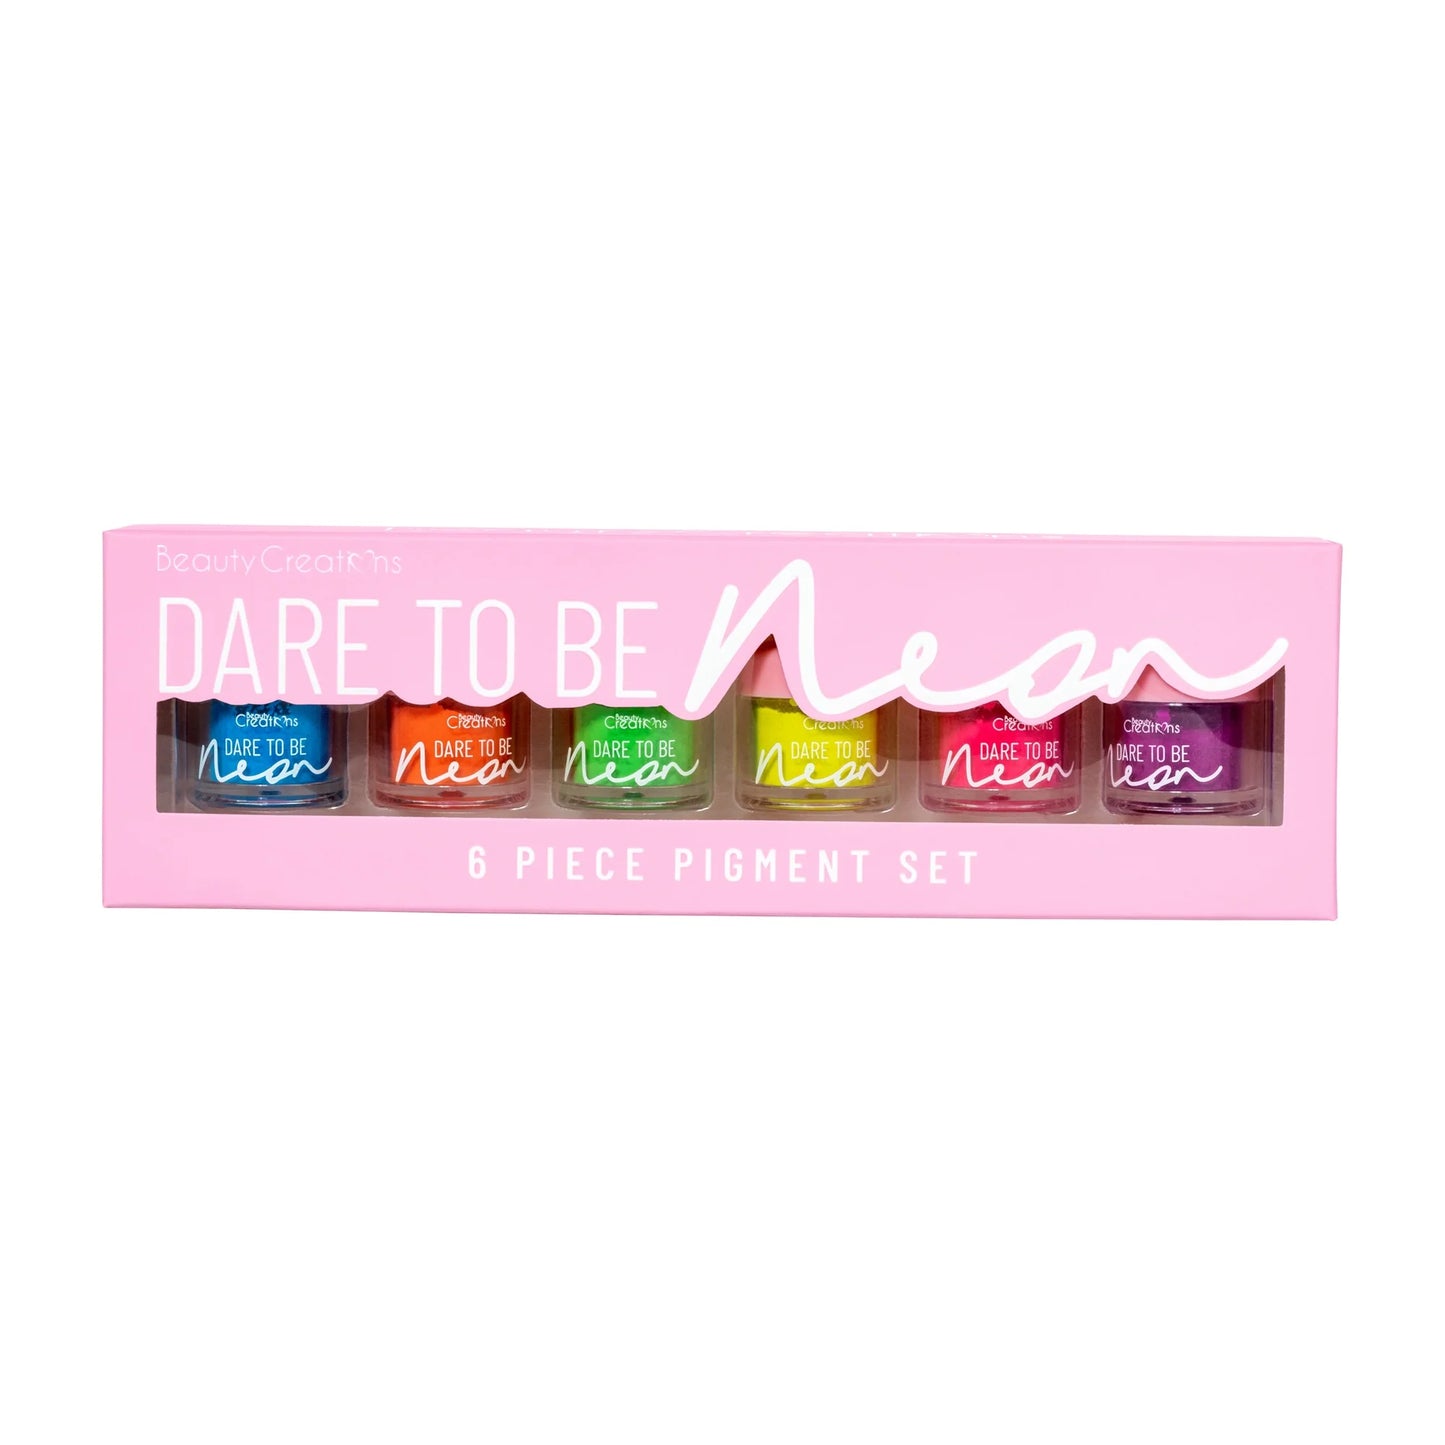 NP1 BC Dare To Be Neon  Pigments Set